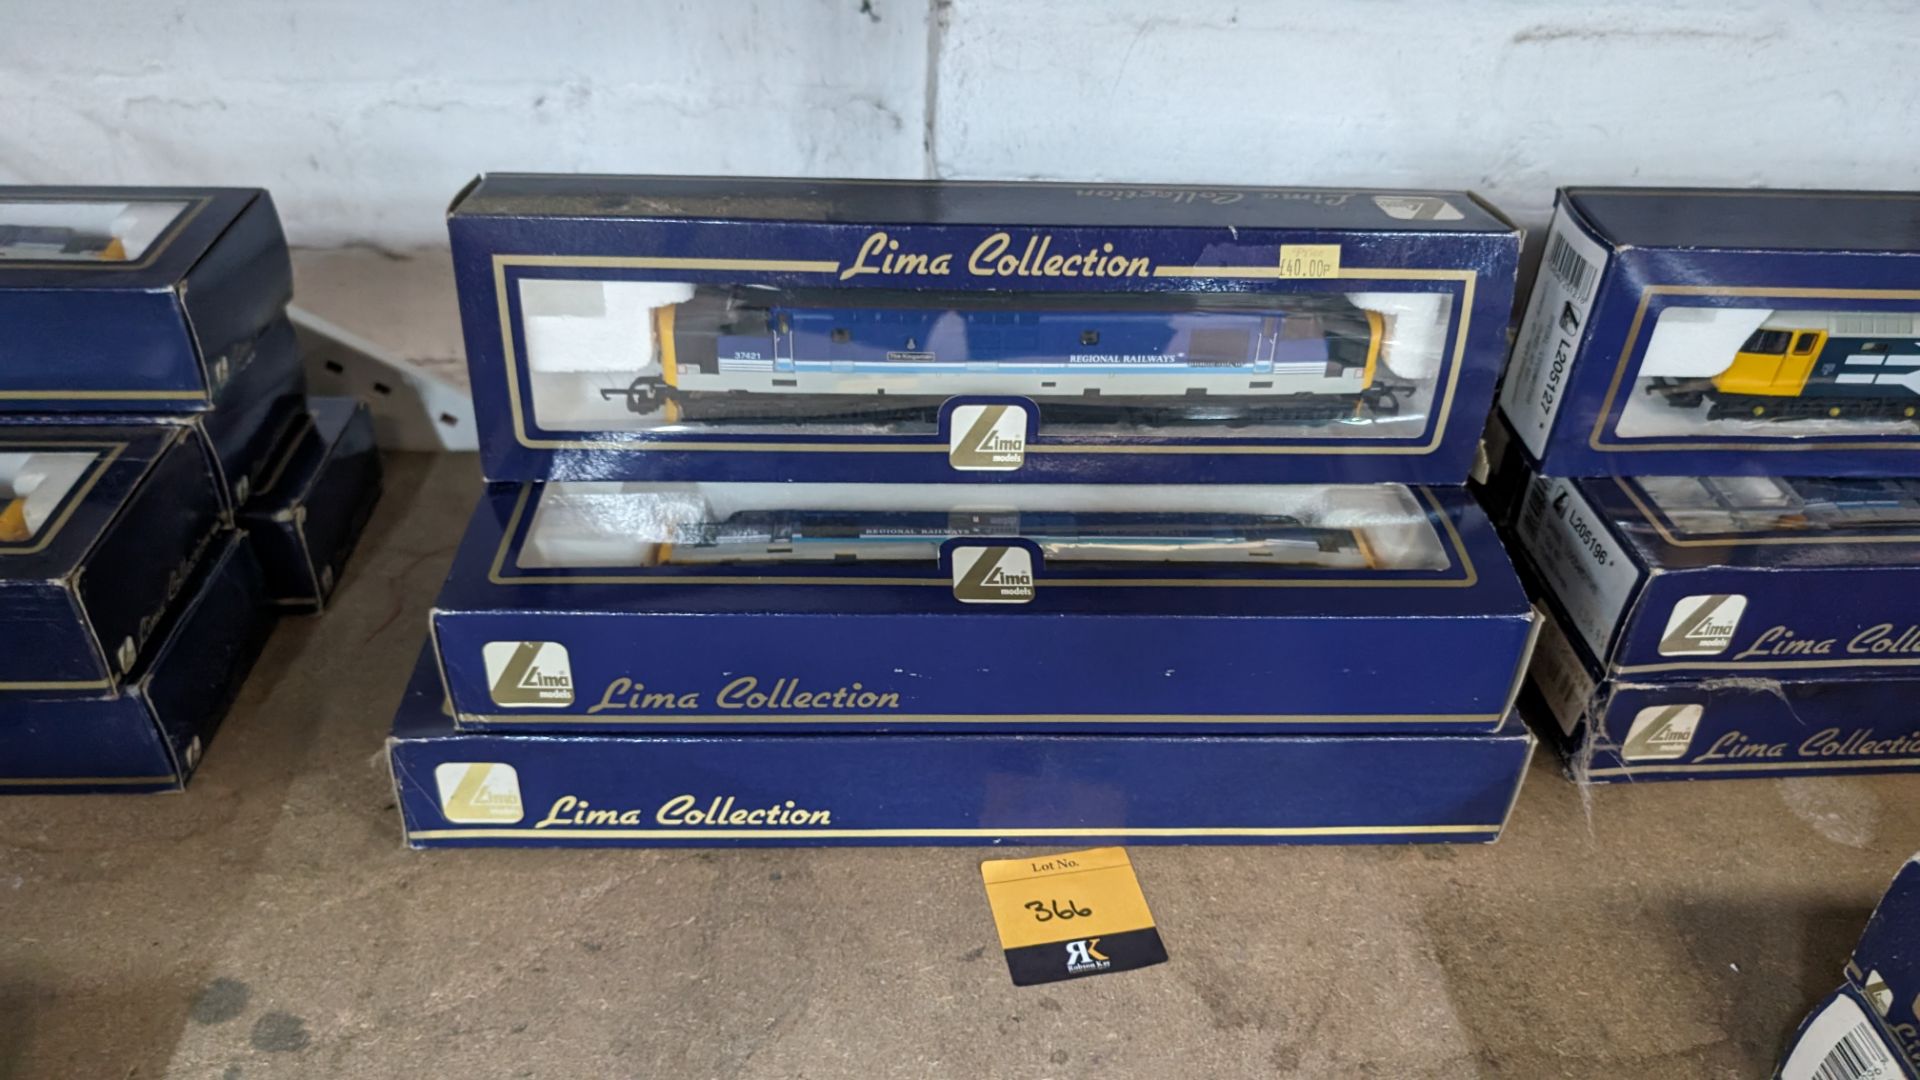 5 off Lima Collection 00 assorted model trains - Image 7 of 10